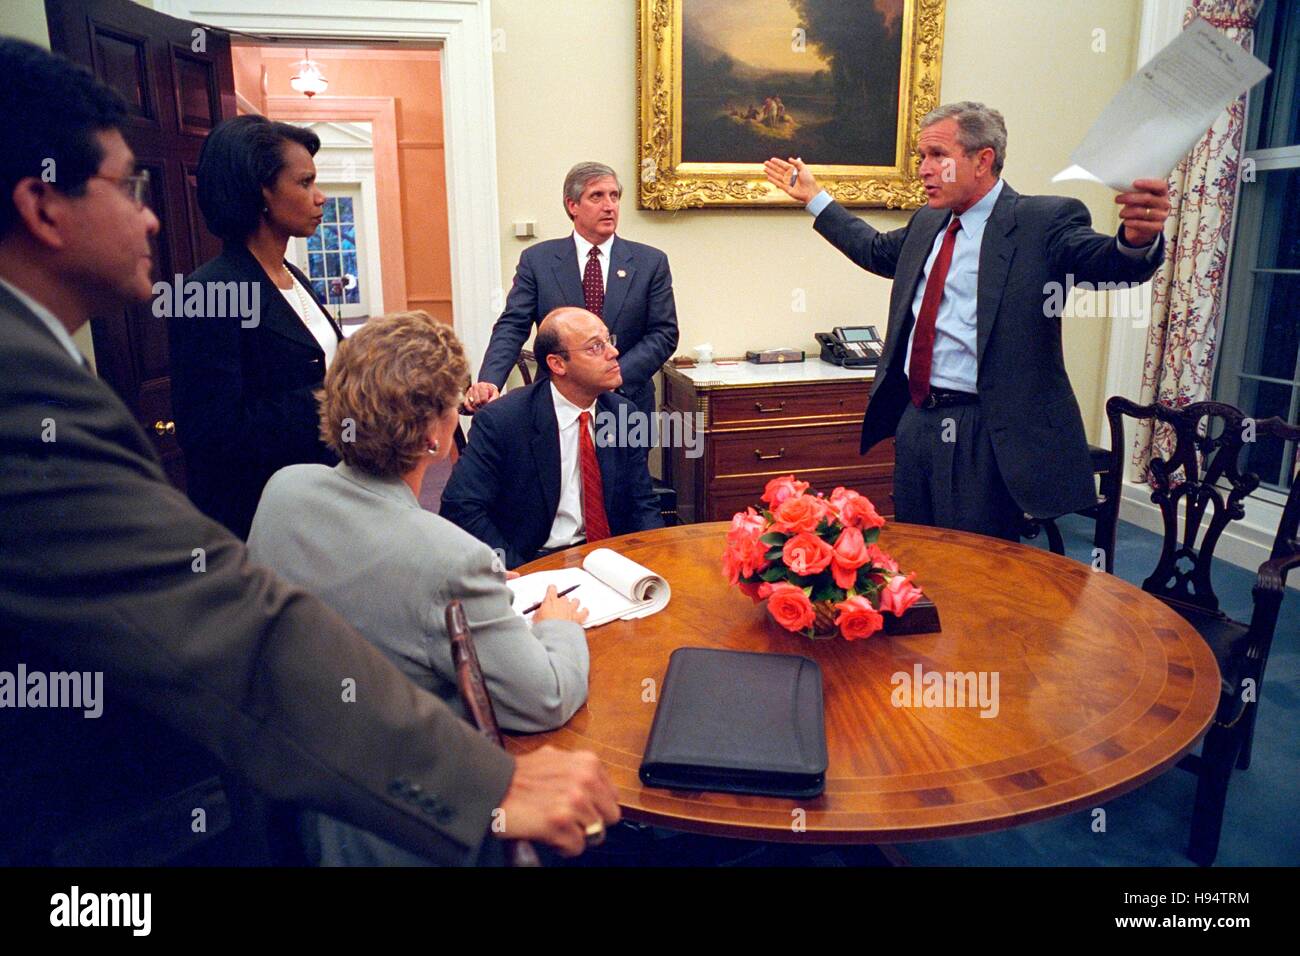 U.S. President George W. Bush reviews his speech following the 9/11 terrorist attacks with senior staff in the White House Oval Office September 11, 2001 in Washington, DC. Stock Photo